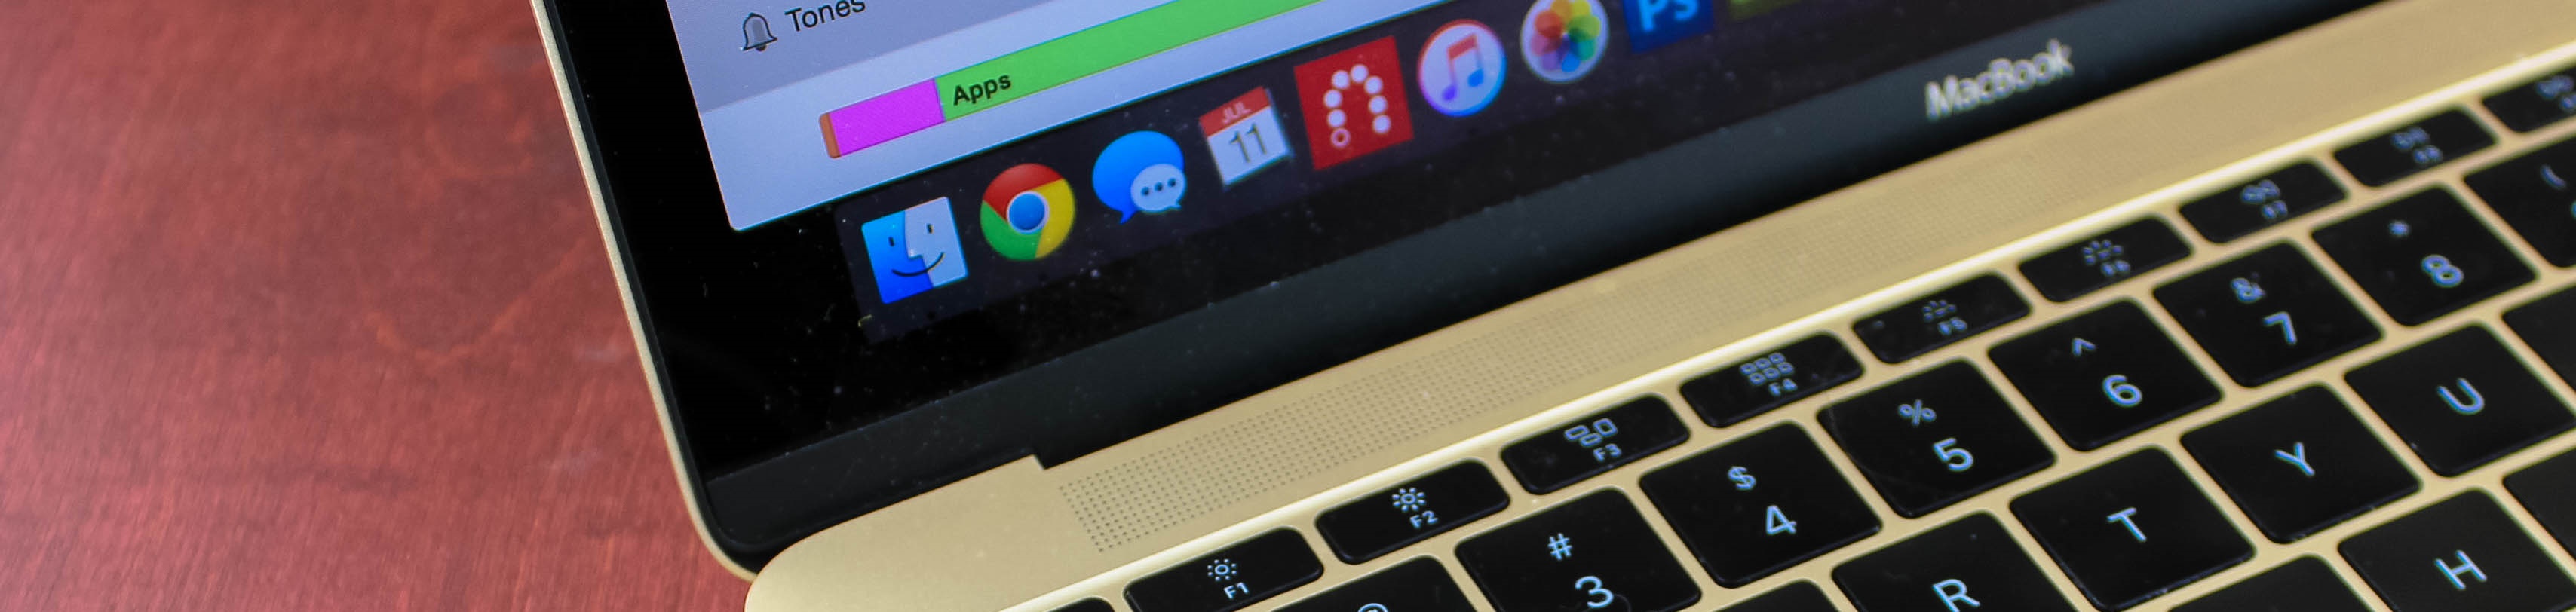 Ways to Boost your Macbook’s Battery Life